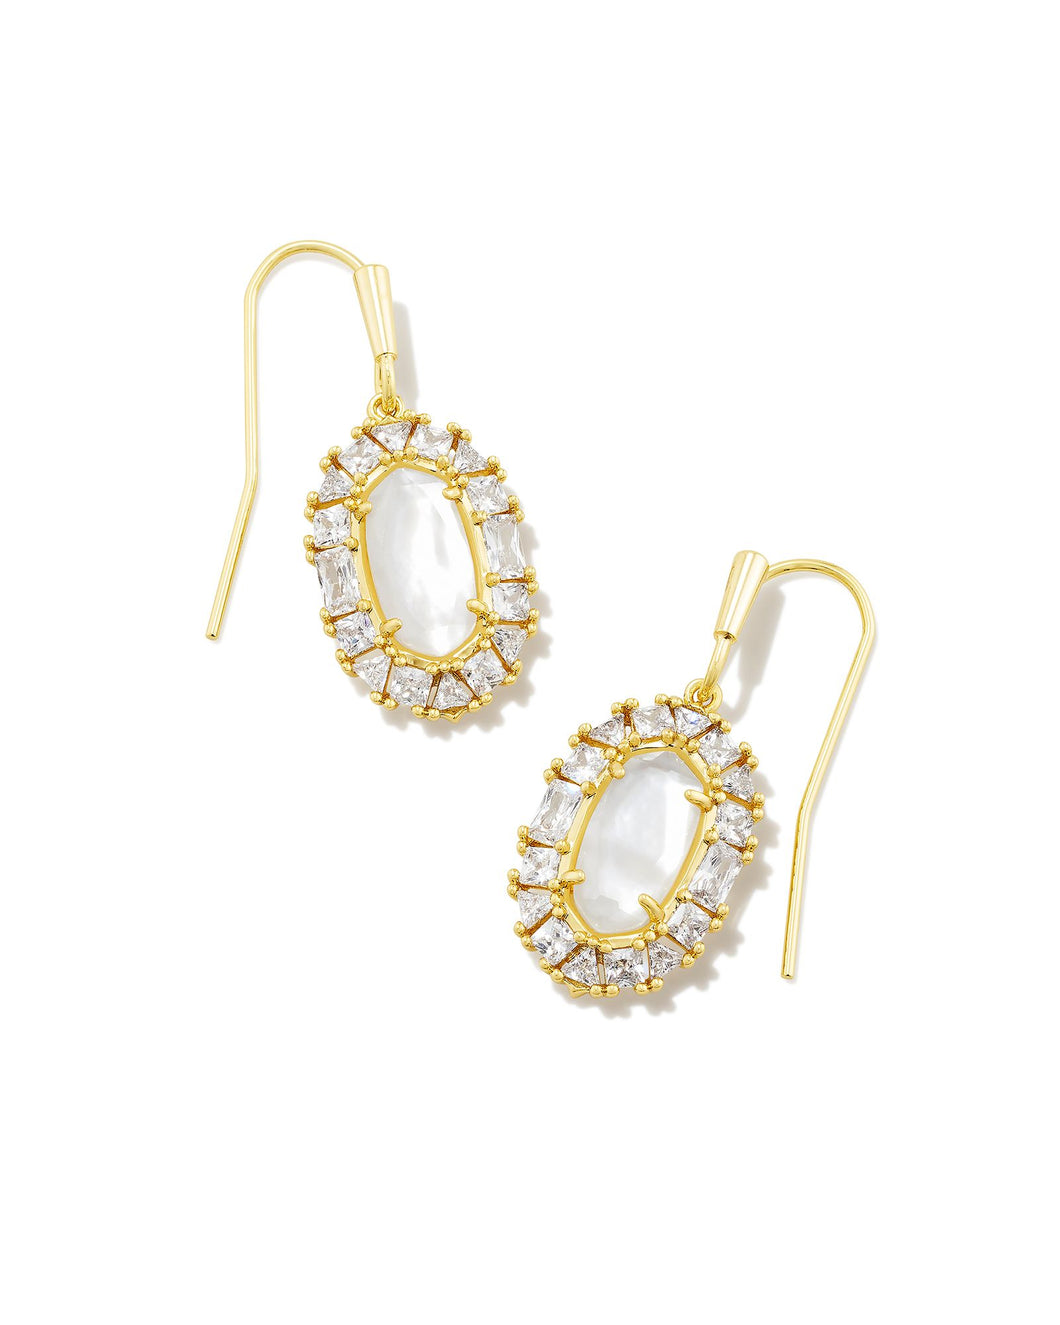 Lee Gold Crystal Frame Drop Earrings in Ivory Mother of Pearl